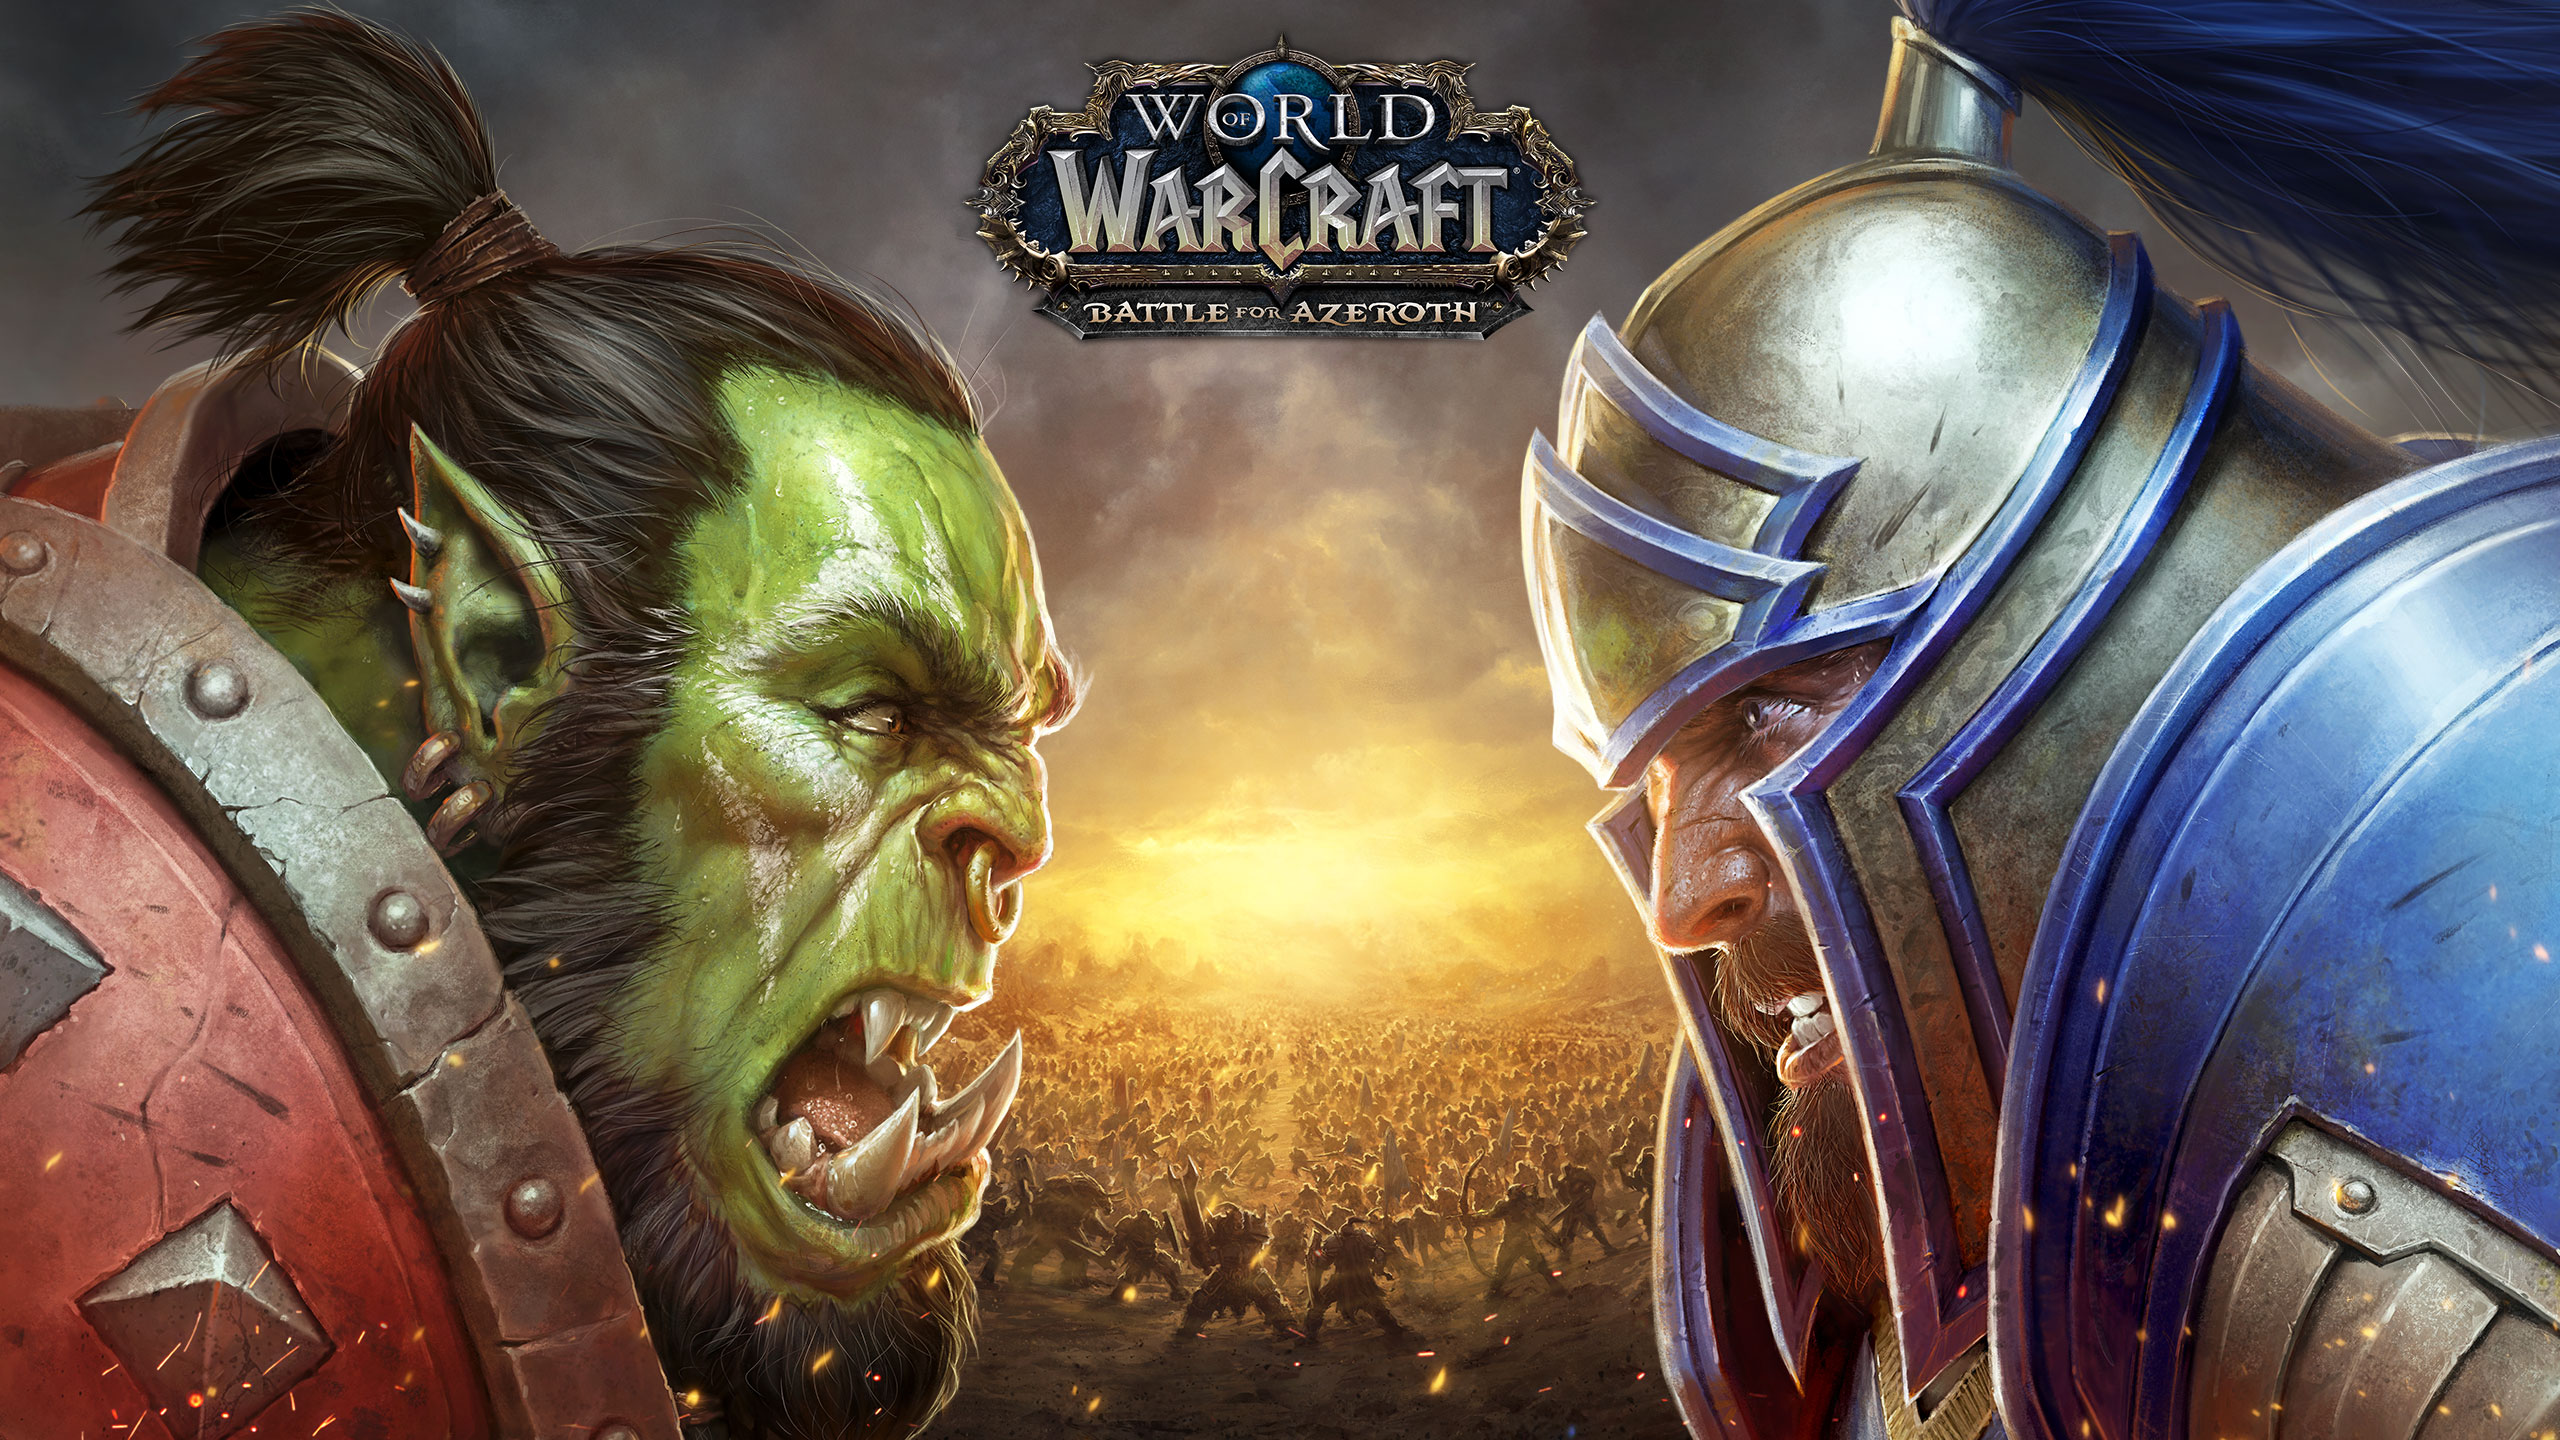 World of Warcraft: Battle for Azeroth Beta Key Giveaway